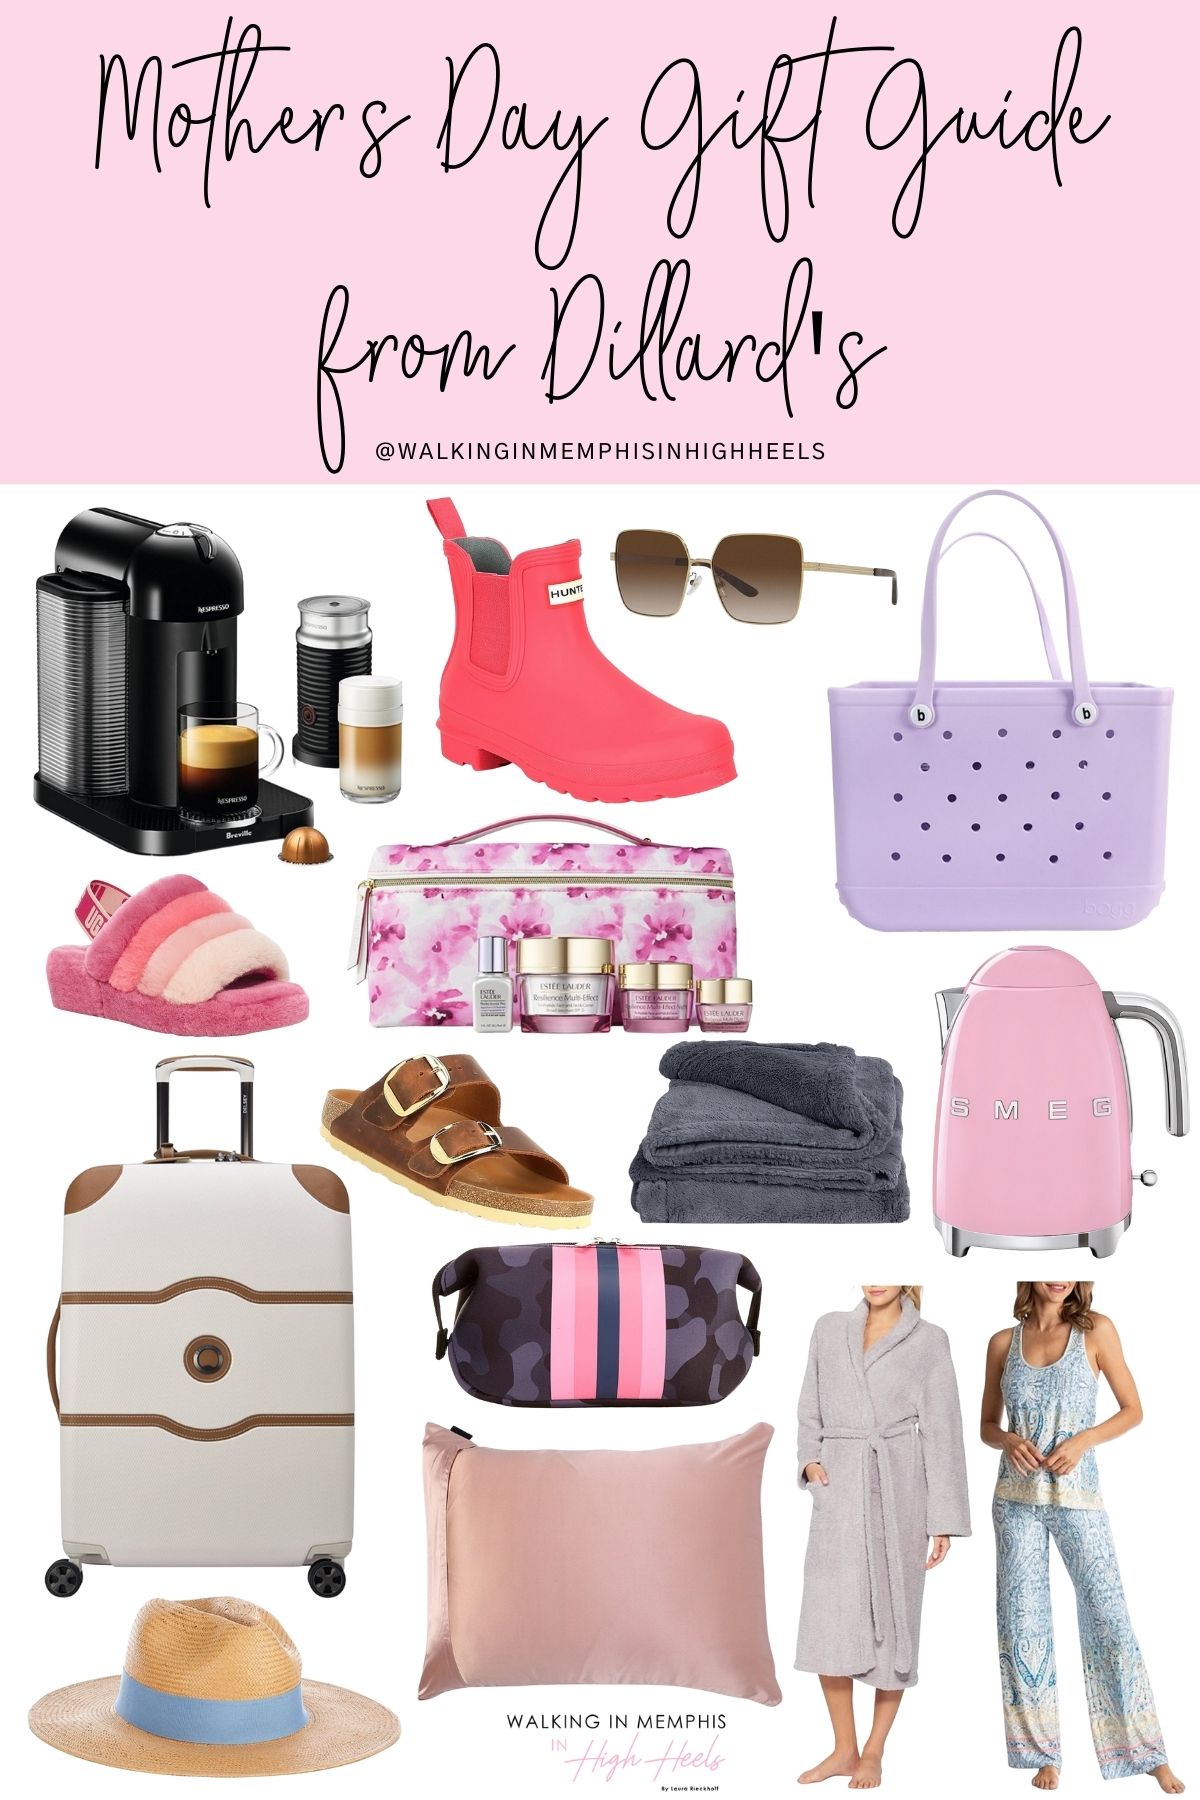 The Best Mother's Day Gift Ideas from Dillard's featured by Walking in Memphis in High Heels